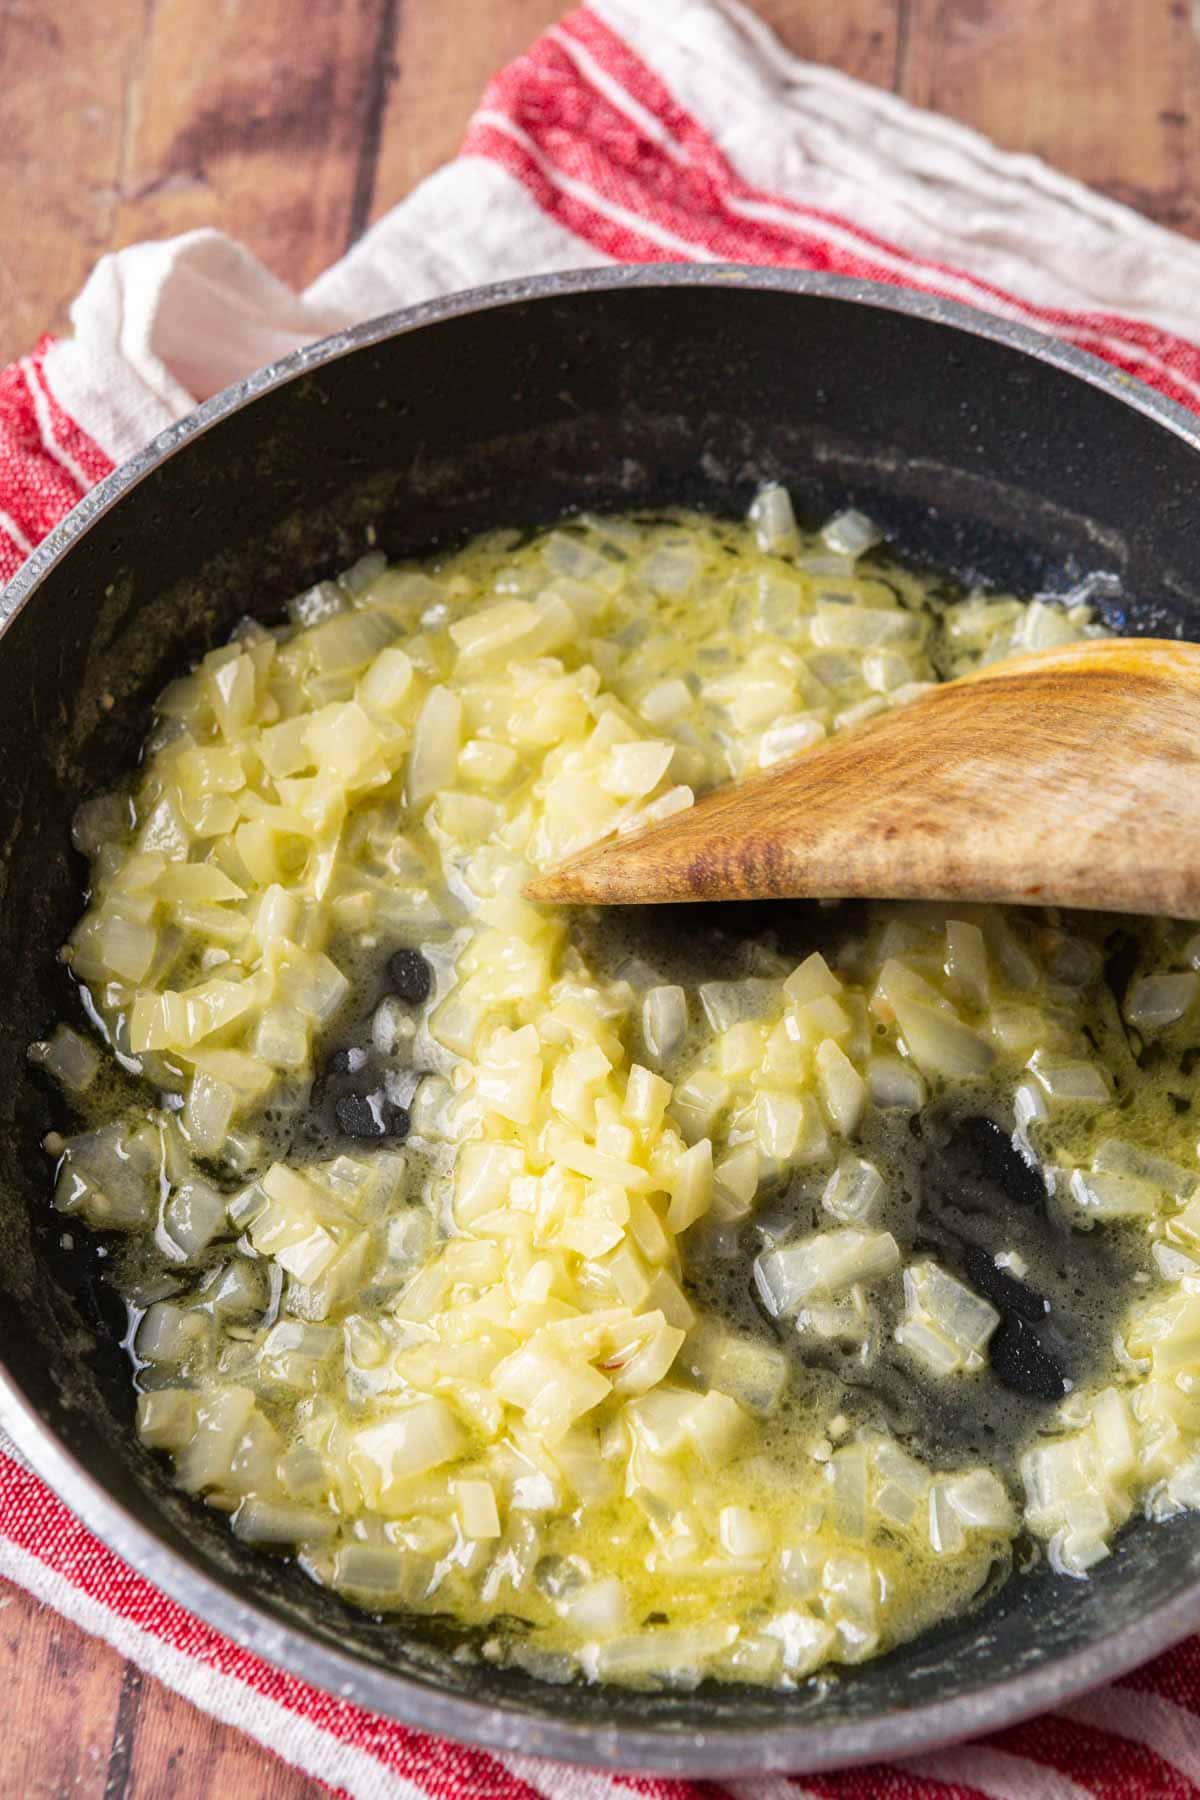 sauteing onions in a skillet